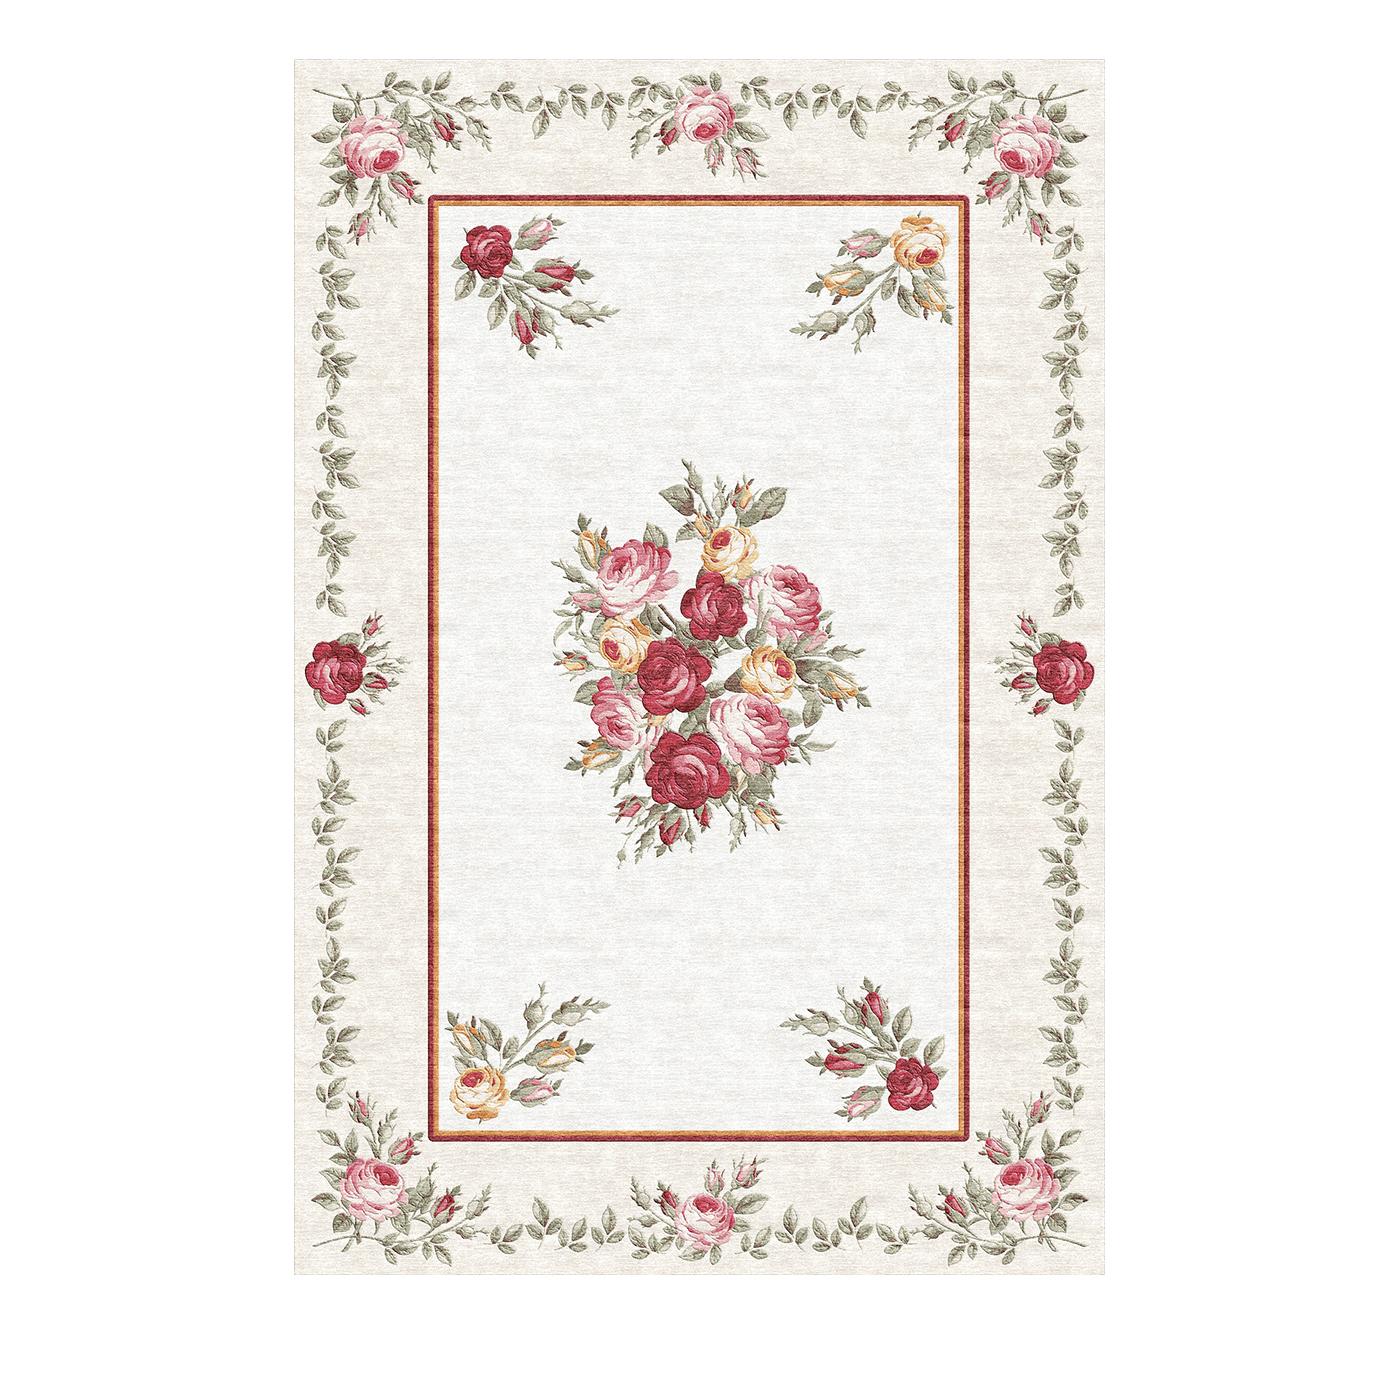 Reminiscent of classical still life paintings, this rug is an elegant union of Southeast Asian craftsmanship and traditional Italian motifs. Hand knotted with wool and bamboo fibers, a bold central bouquet with pink, red, and orange roses is set